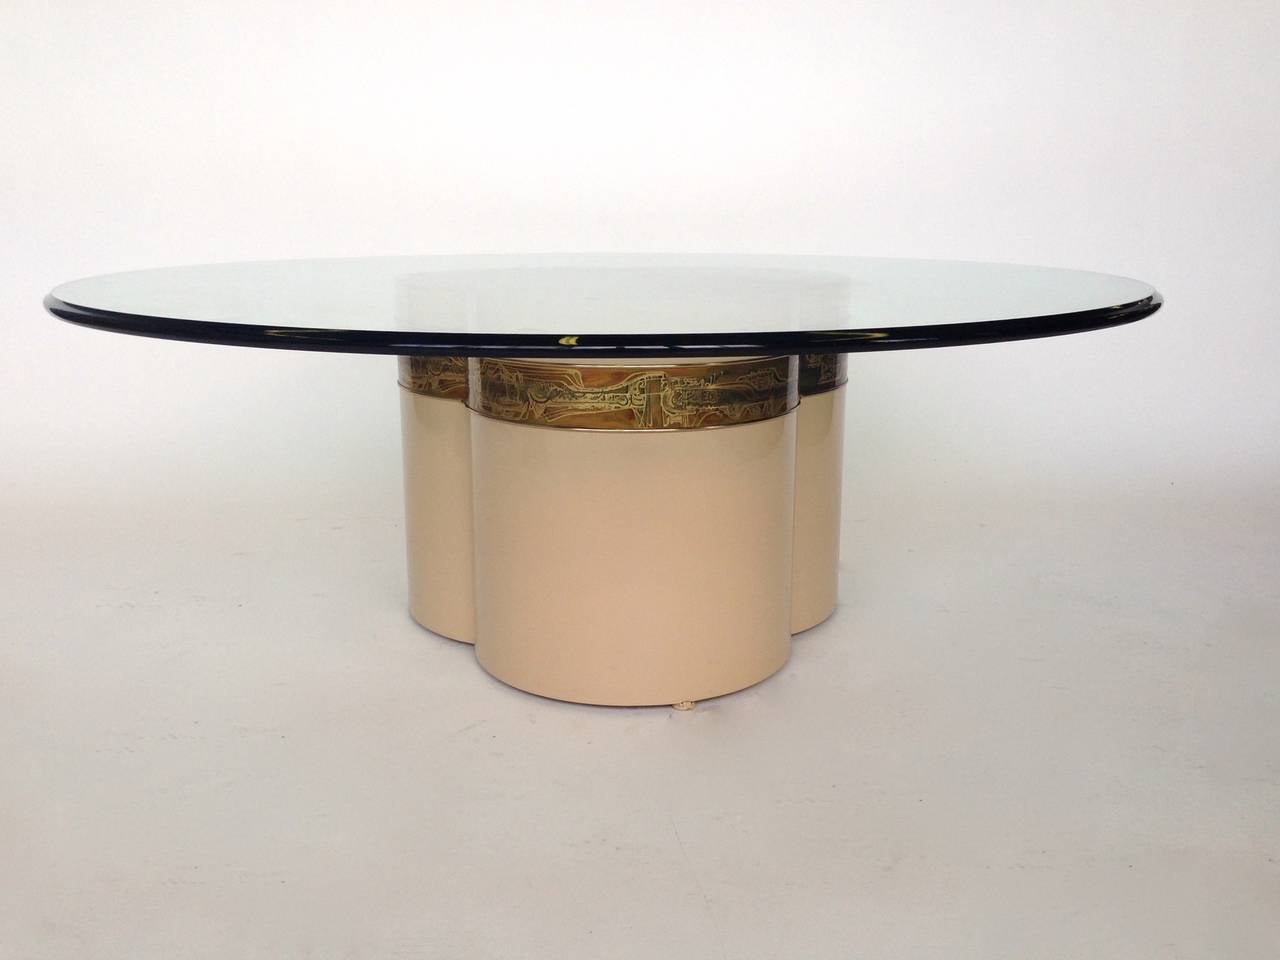 Sculptural lacquered pedestal with etched brass detail and glass top. Designed by Bernard Rohne for Mastercraft.